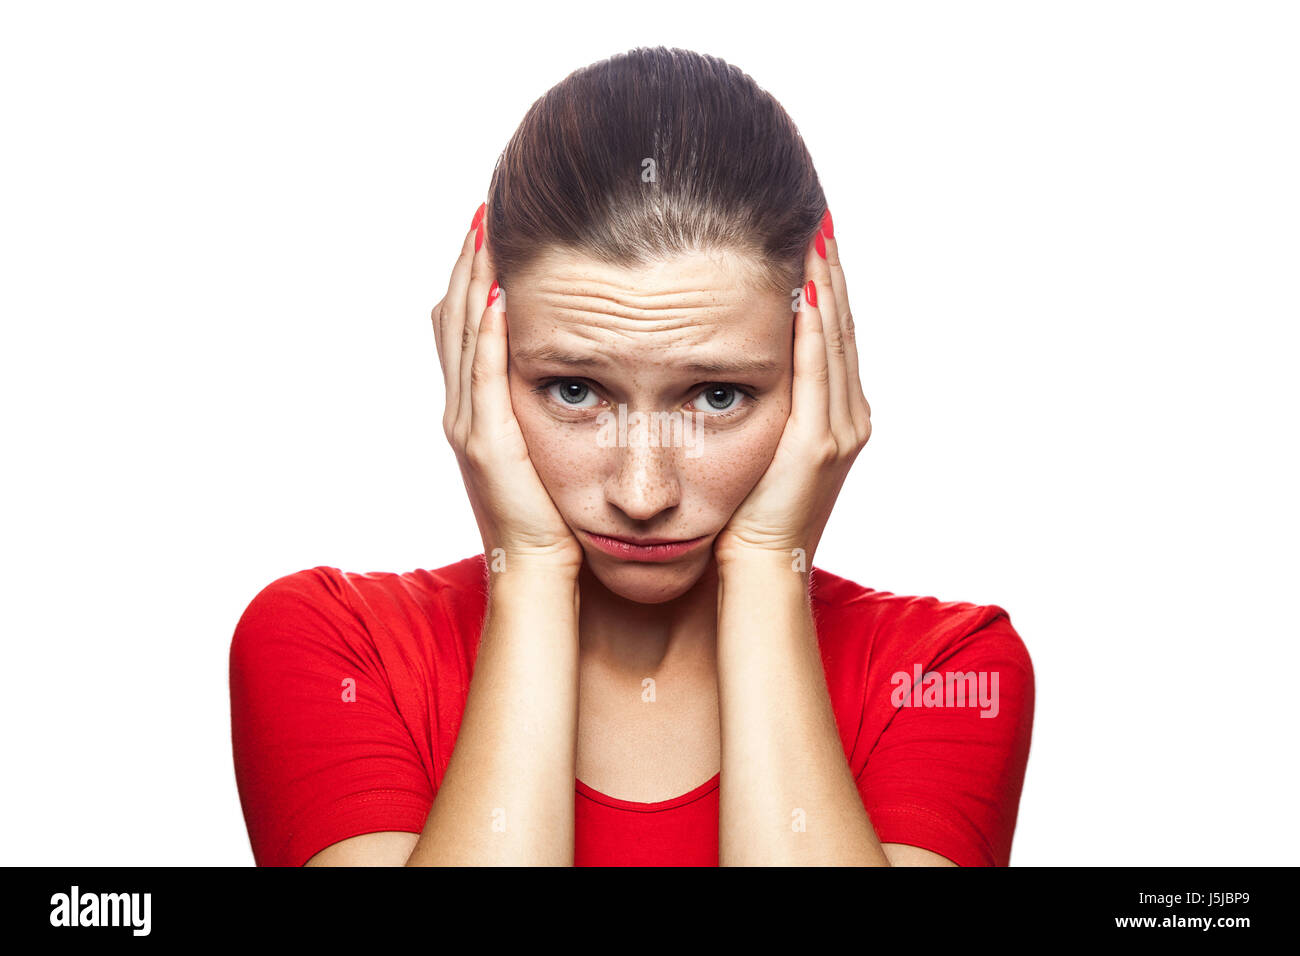 Portrait of worried scared woman in red t-shirt with freckles. looking at camera, studio shot. isolated on white background. Stock Photo